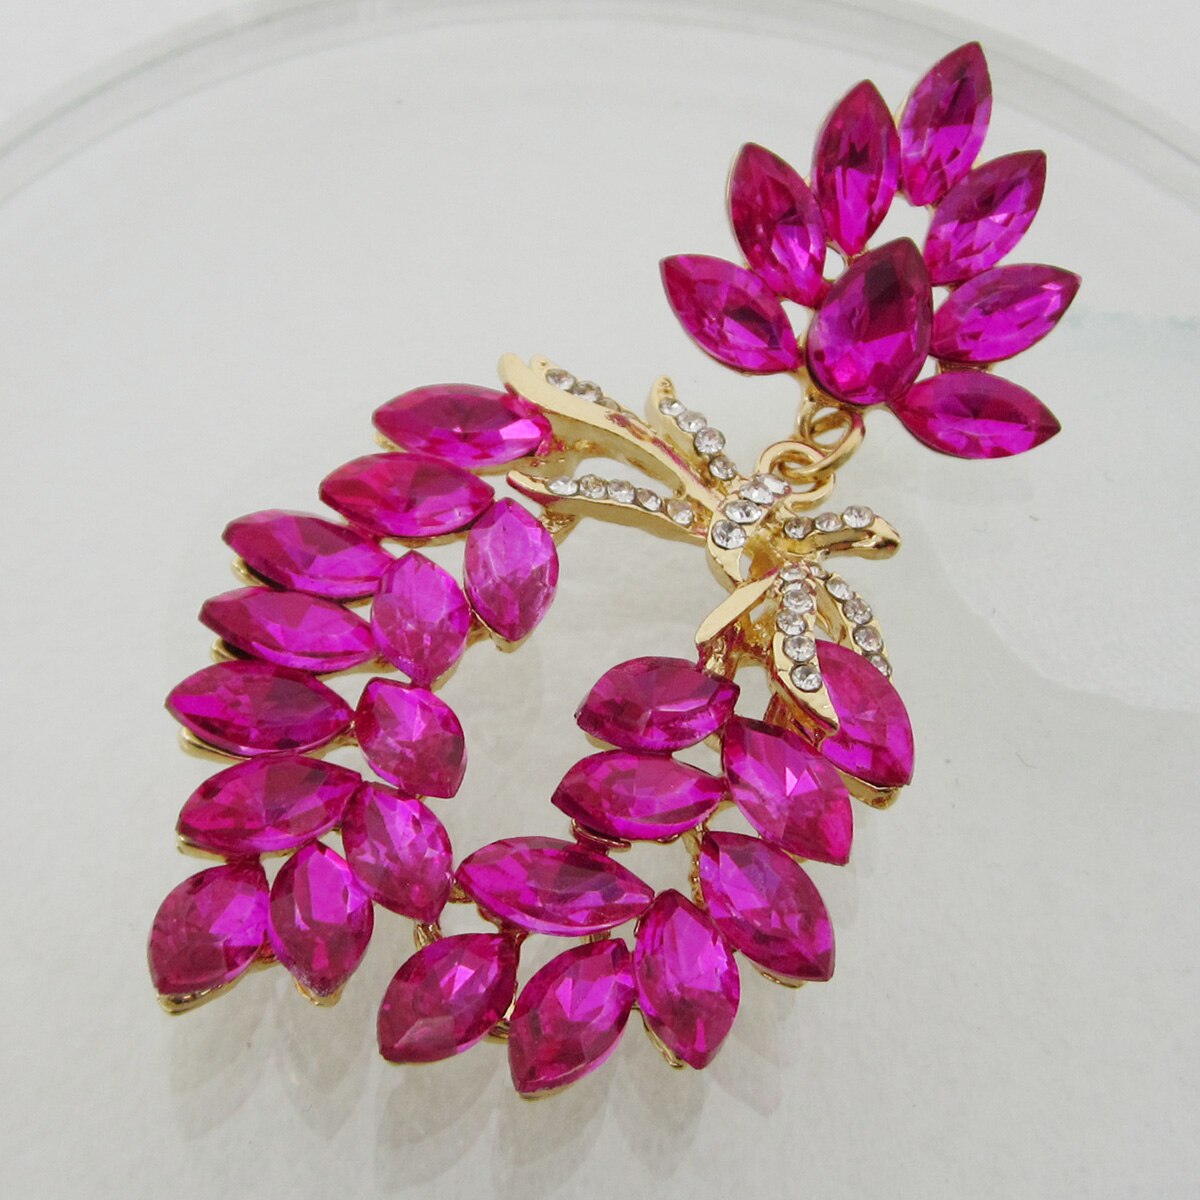 New Arrivals Boutique Leaf Crystal Drop Earrings for Women